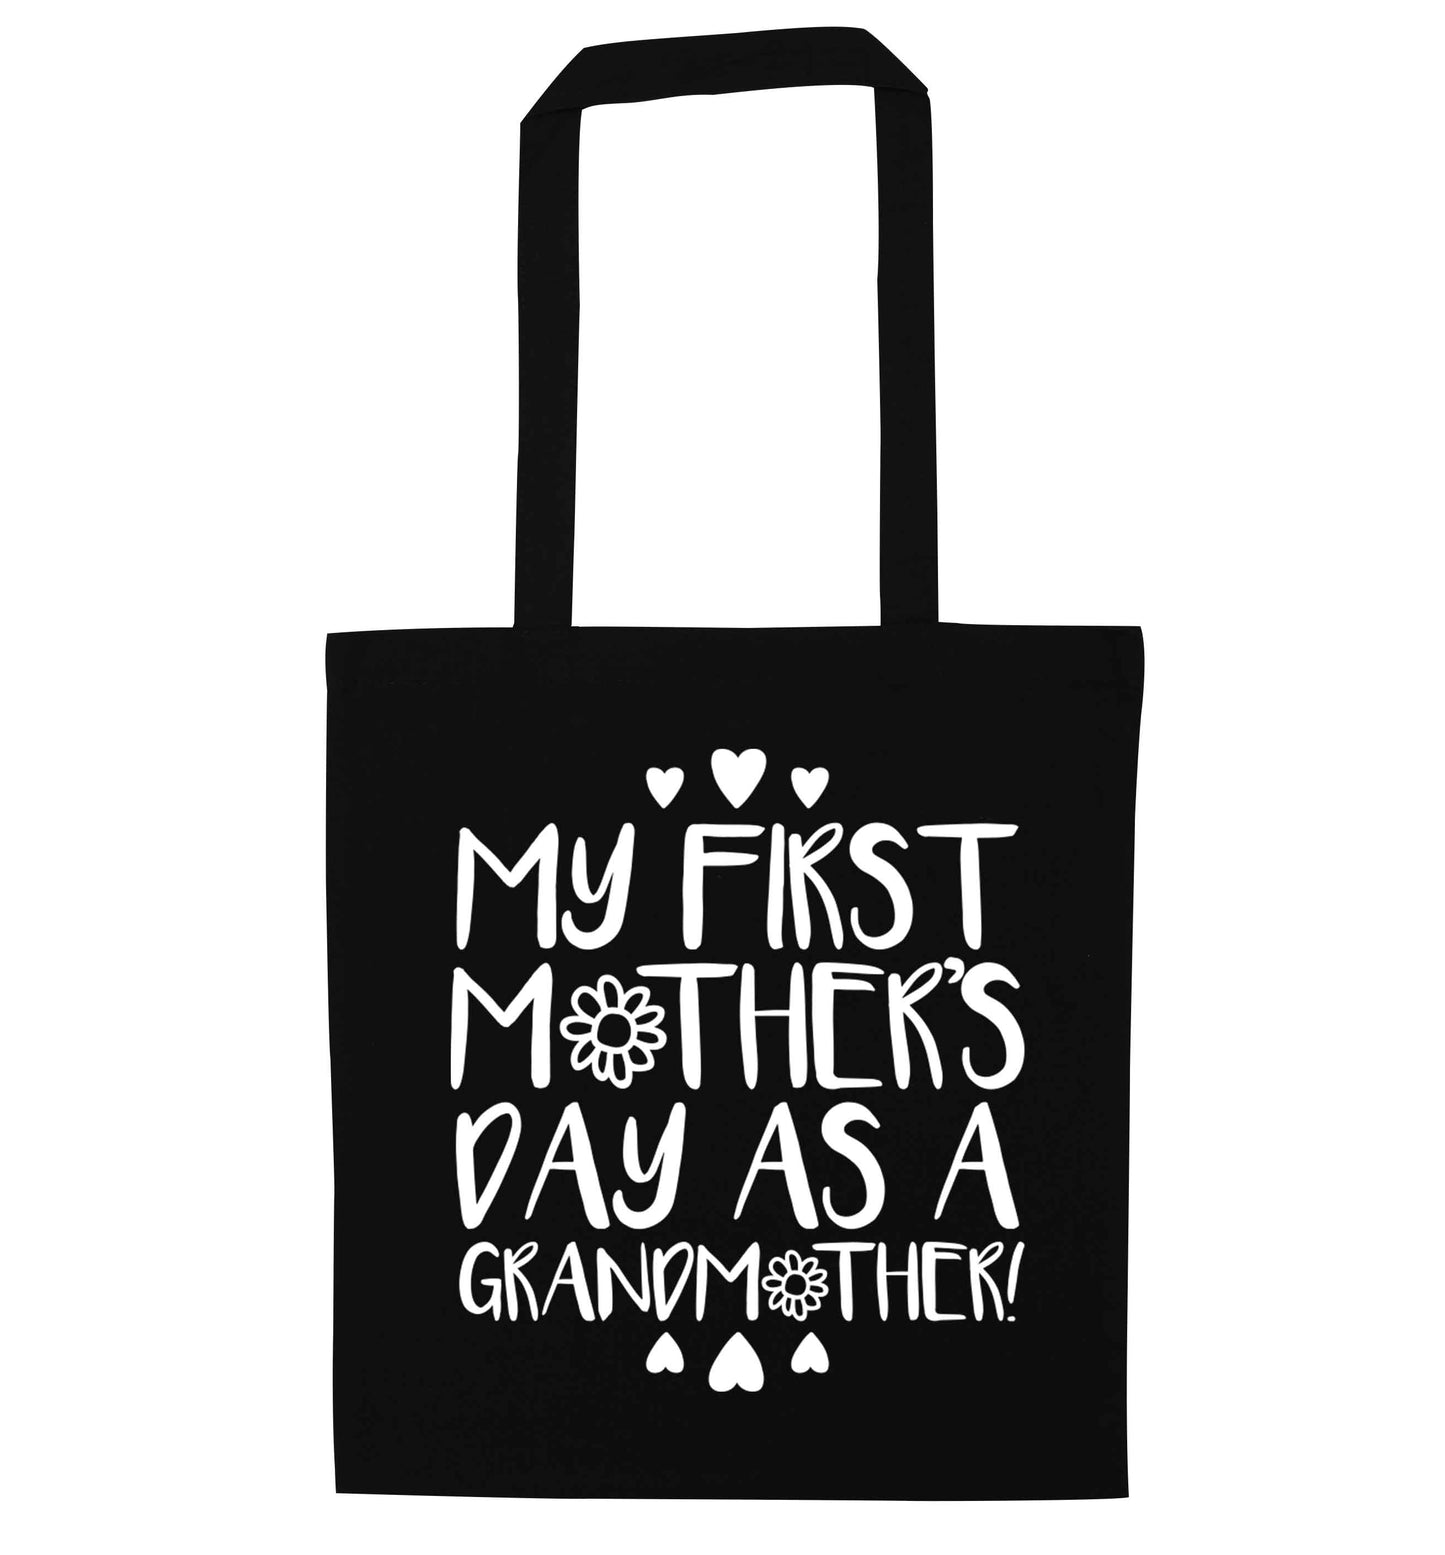 It's my first mother's day as a grandmother black tote bag